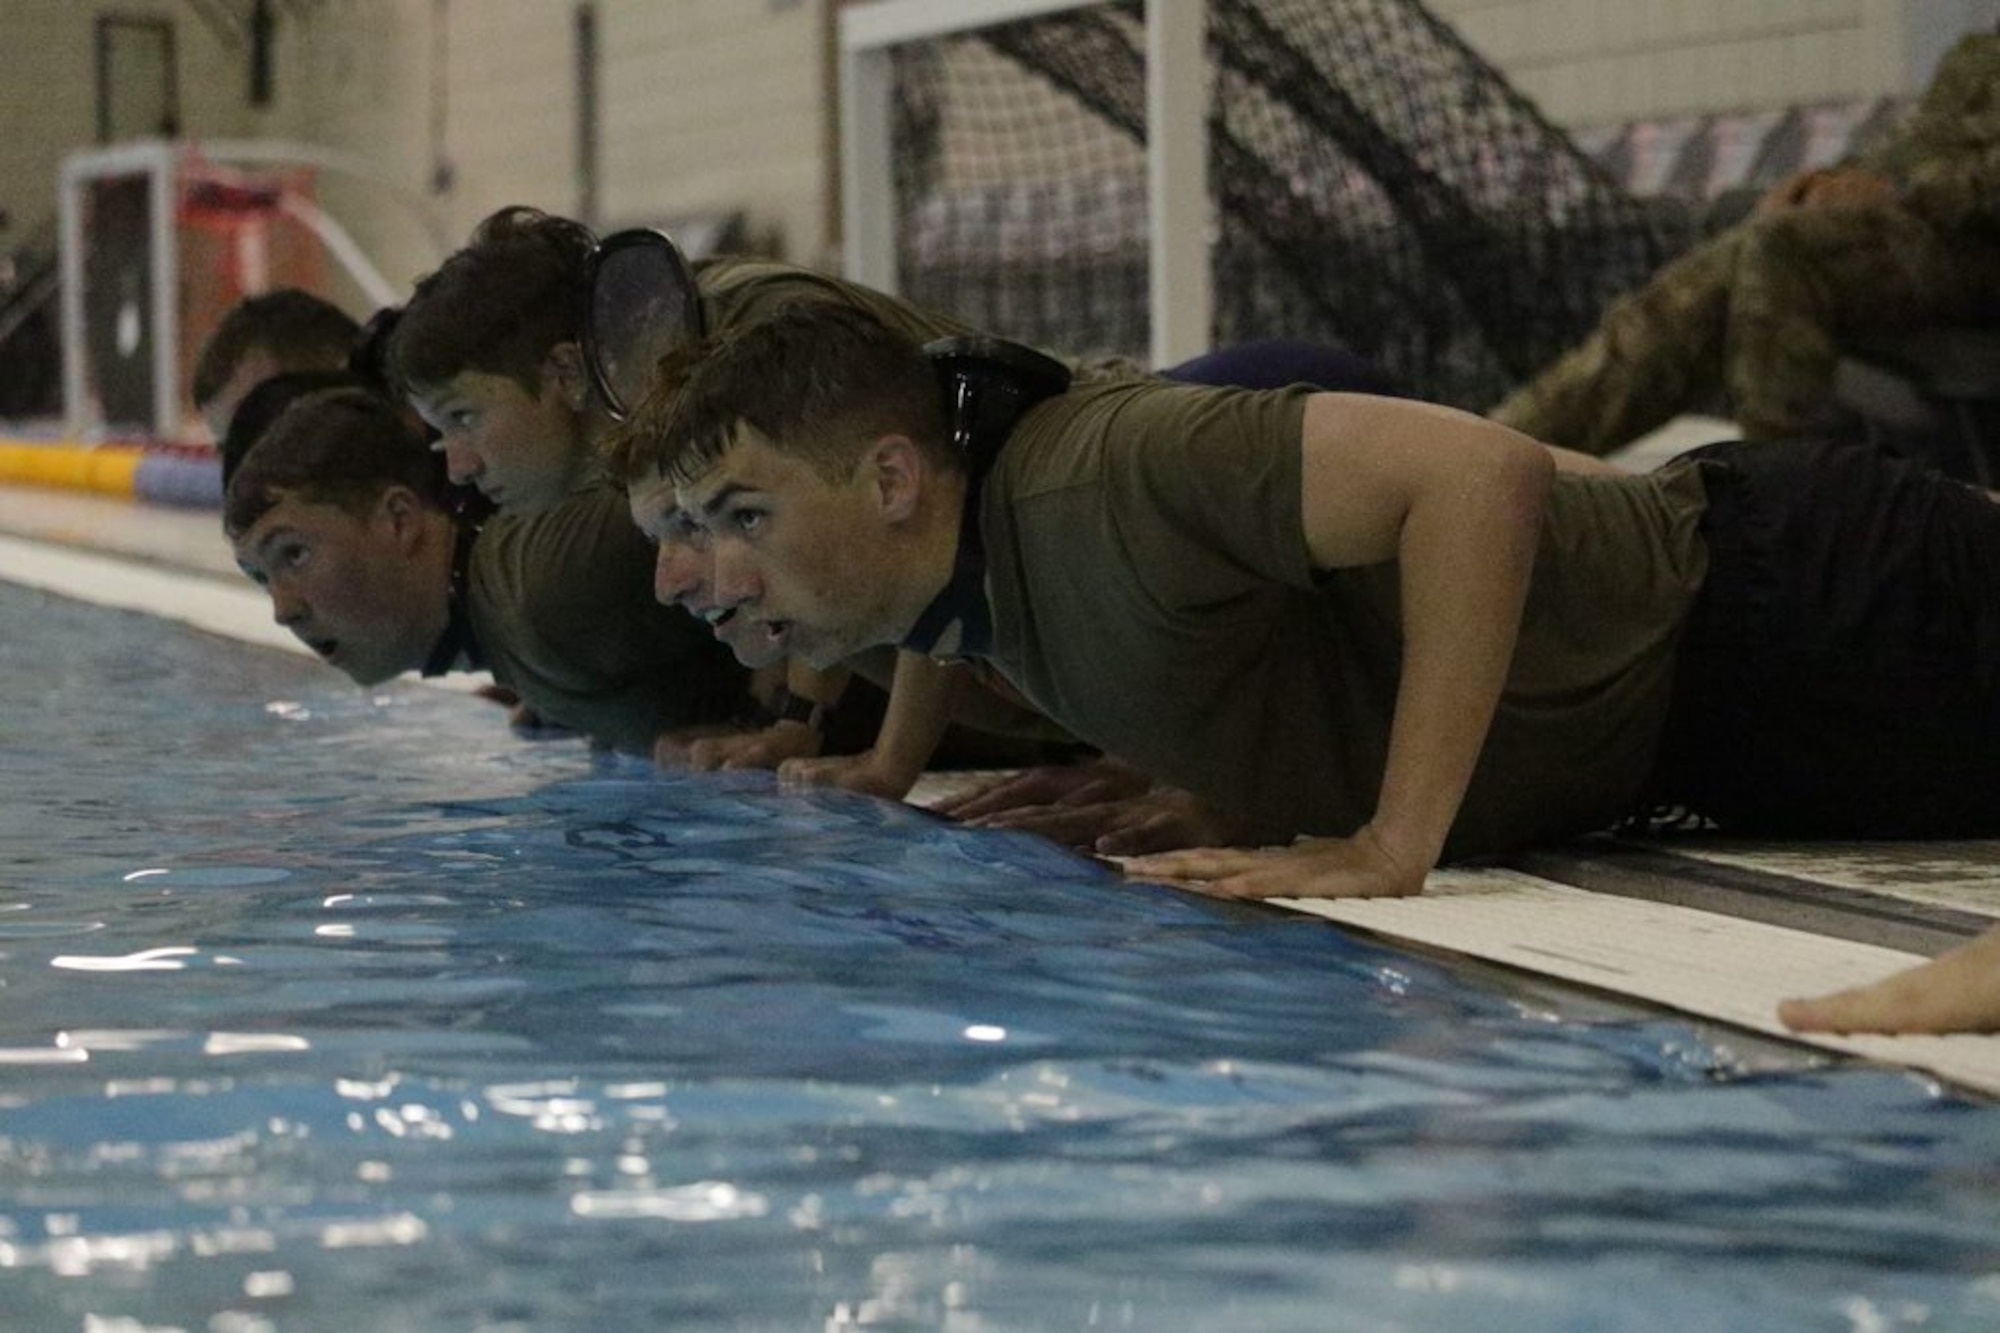 Cadets wait in the prone position by the edge of the pool before beginning 10-ups during the Special Warfare Orientation Course at the U.S. Air Force Academy, Colo., June 8, 2022. The exercise starts in the push-up position followed by an underwater swim across the pool. Most cadets do not have enough confidence in the water before being tested. This exercise and others provided the necessary proper training to build that confidence safely.  (U.S. Air Force Academy courtesy photo)